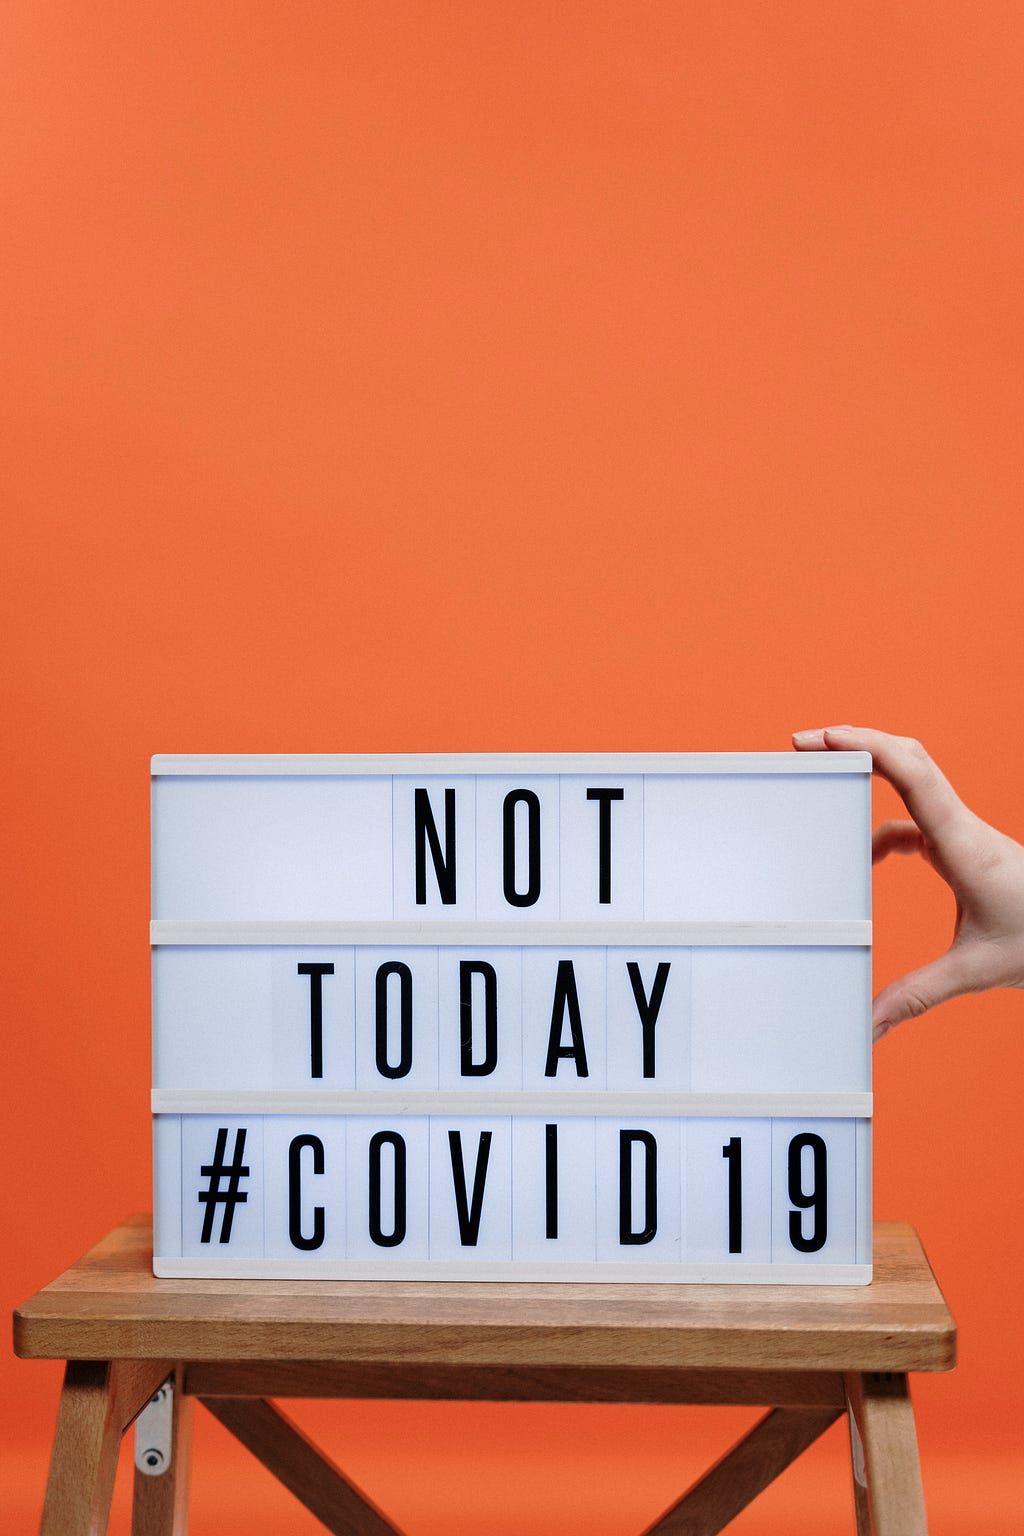 Not today COVID 19 sign on a wooden stool